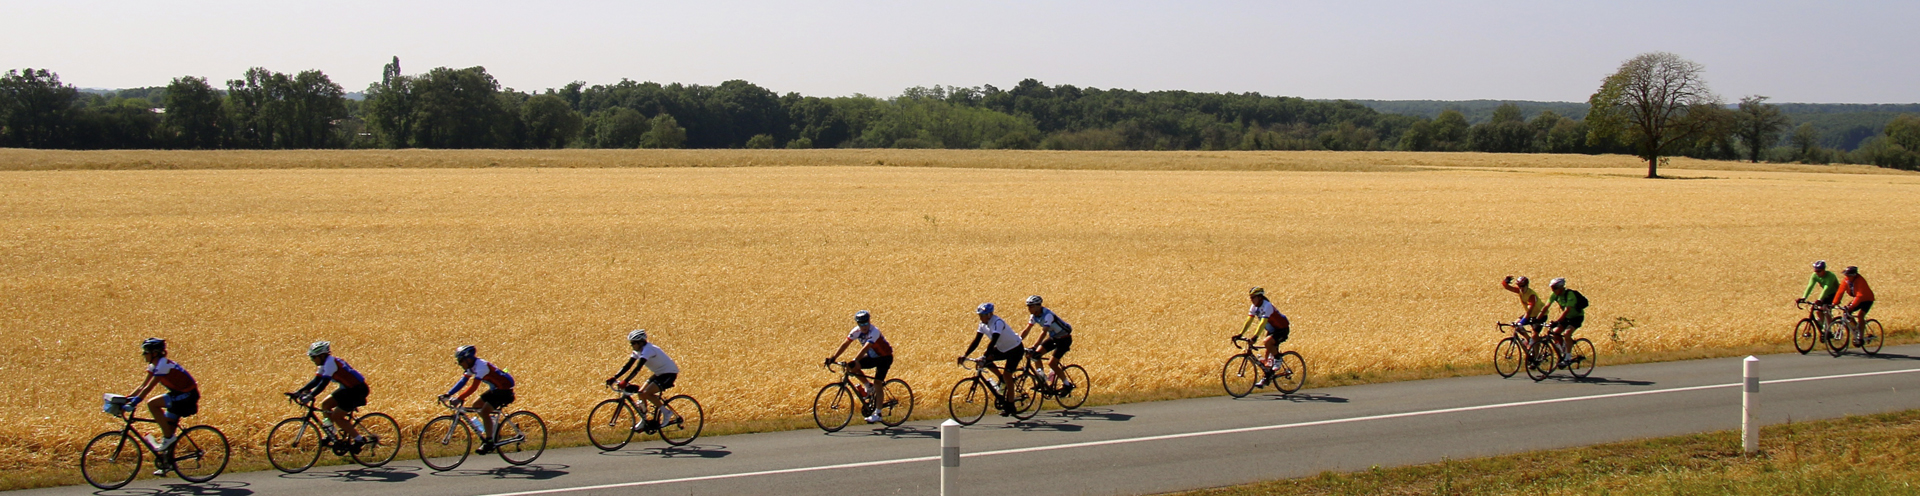 Global Cycling Adventures - Road Cycling Tours